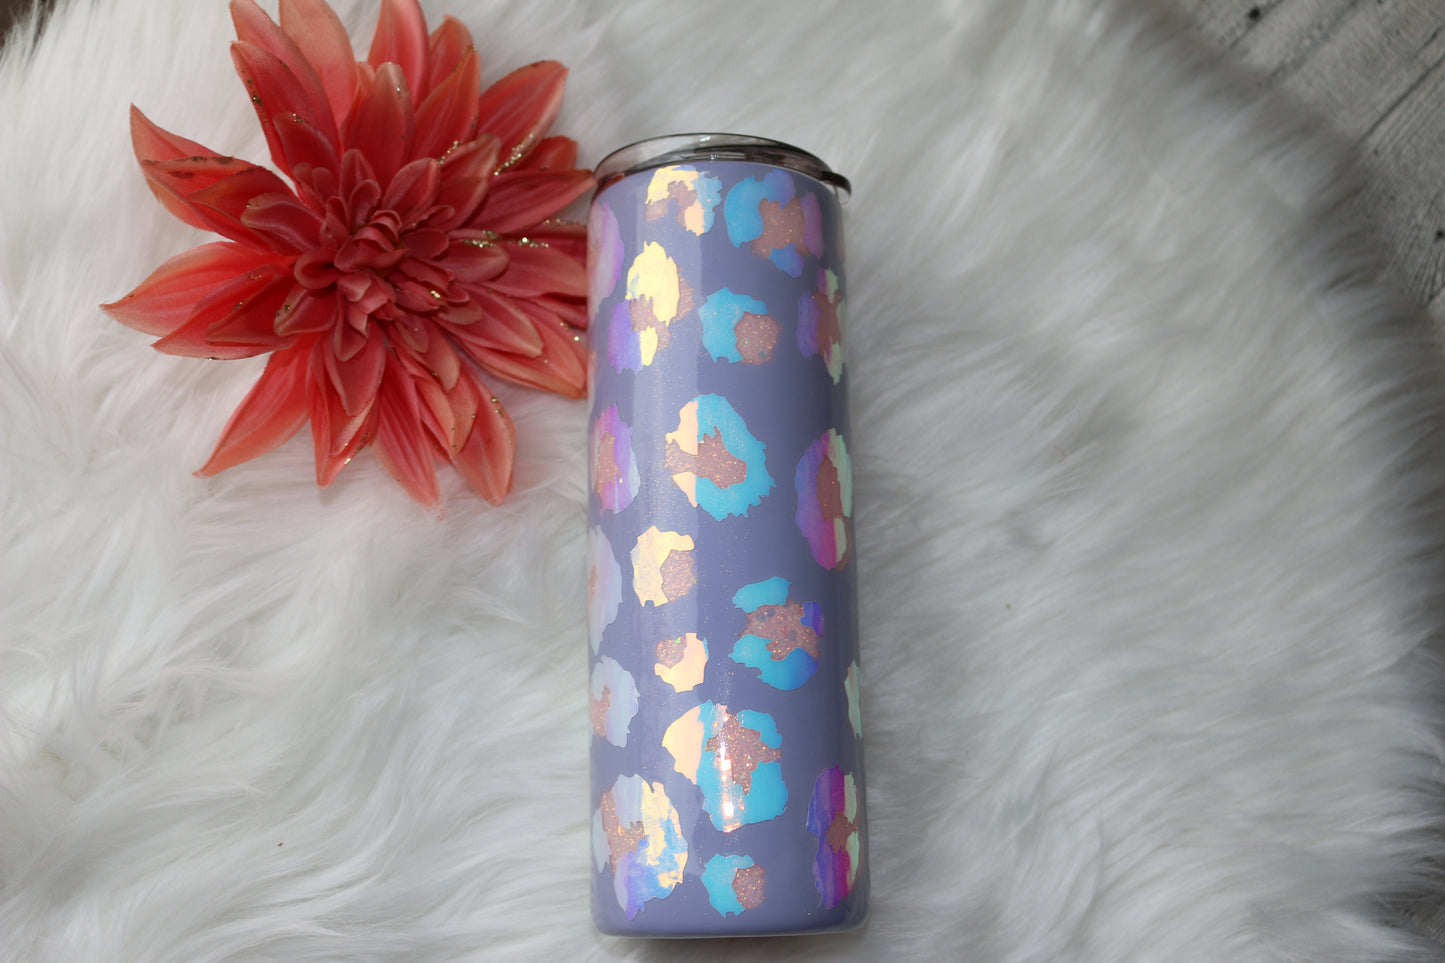 24 oz peek-a-boo pink and lavender "Leopard" stainless steel tumbler